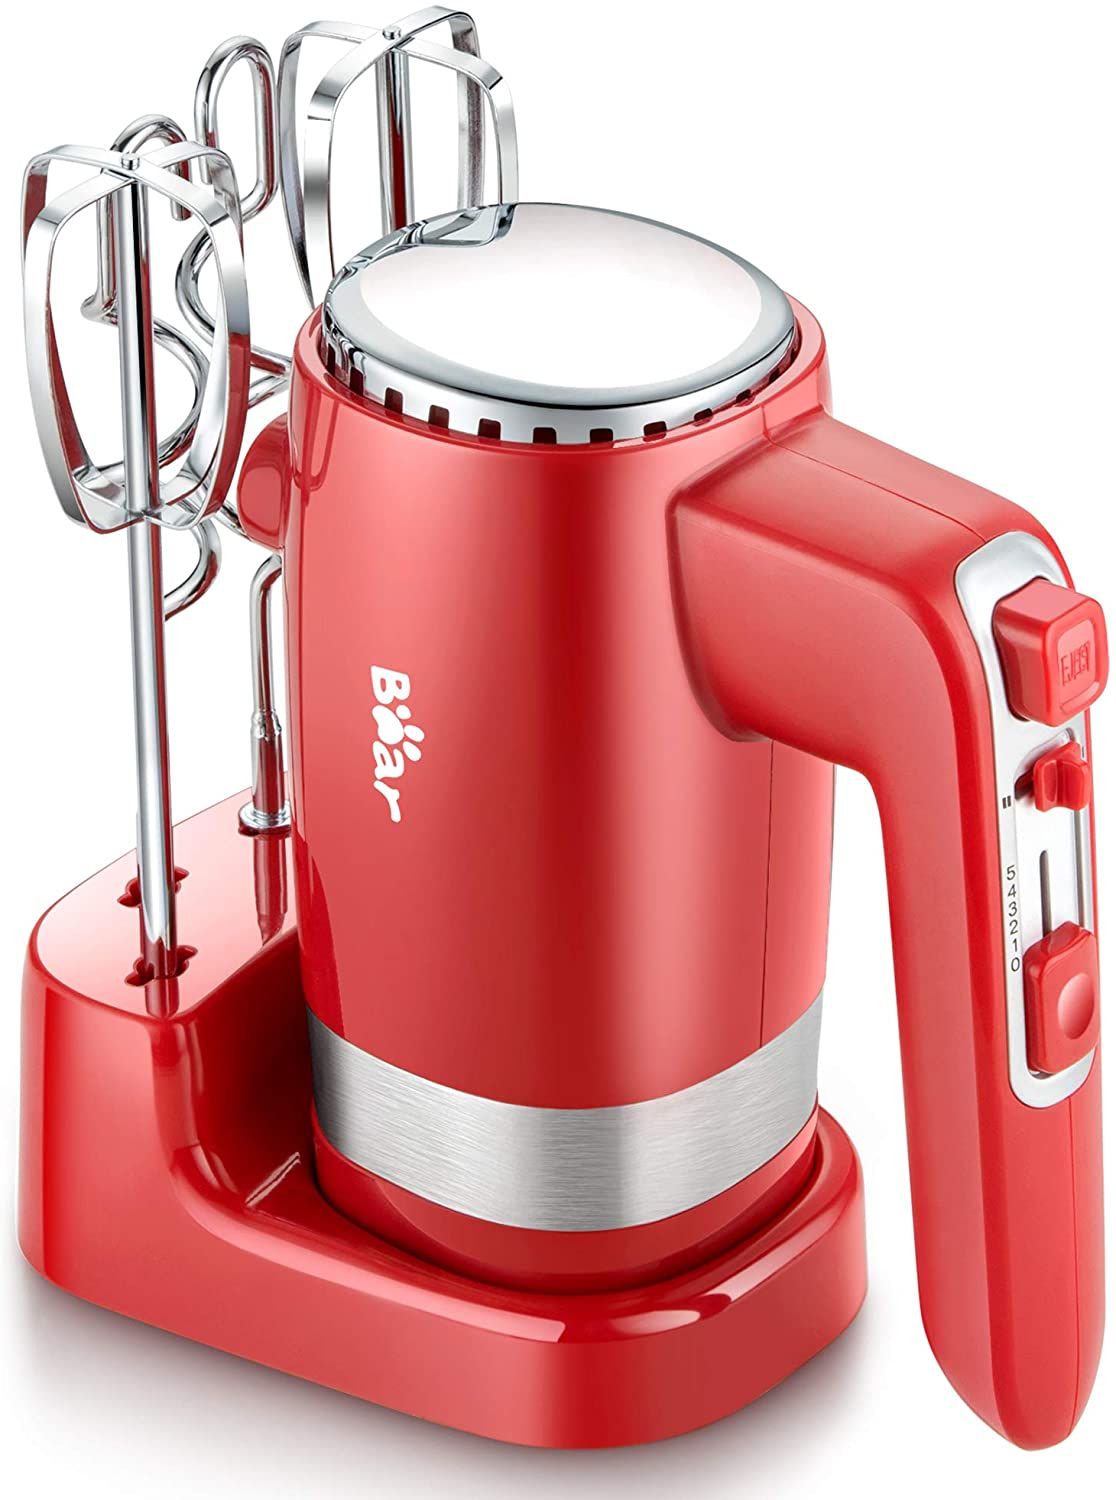 The 10 Best Hand Mixers of 2021 ReviewThis